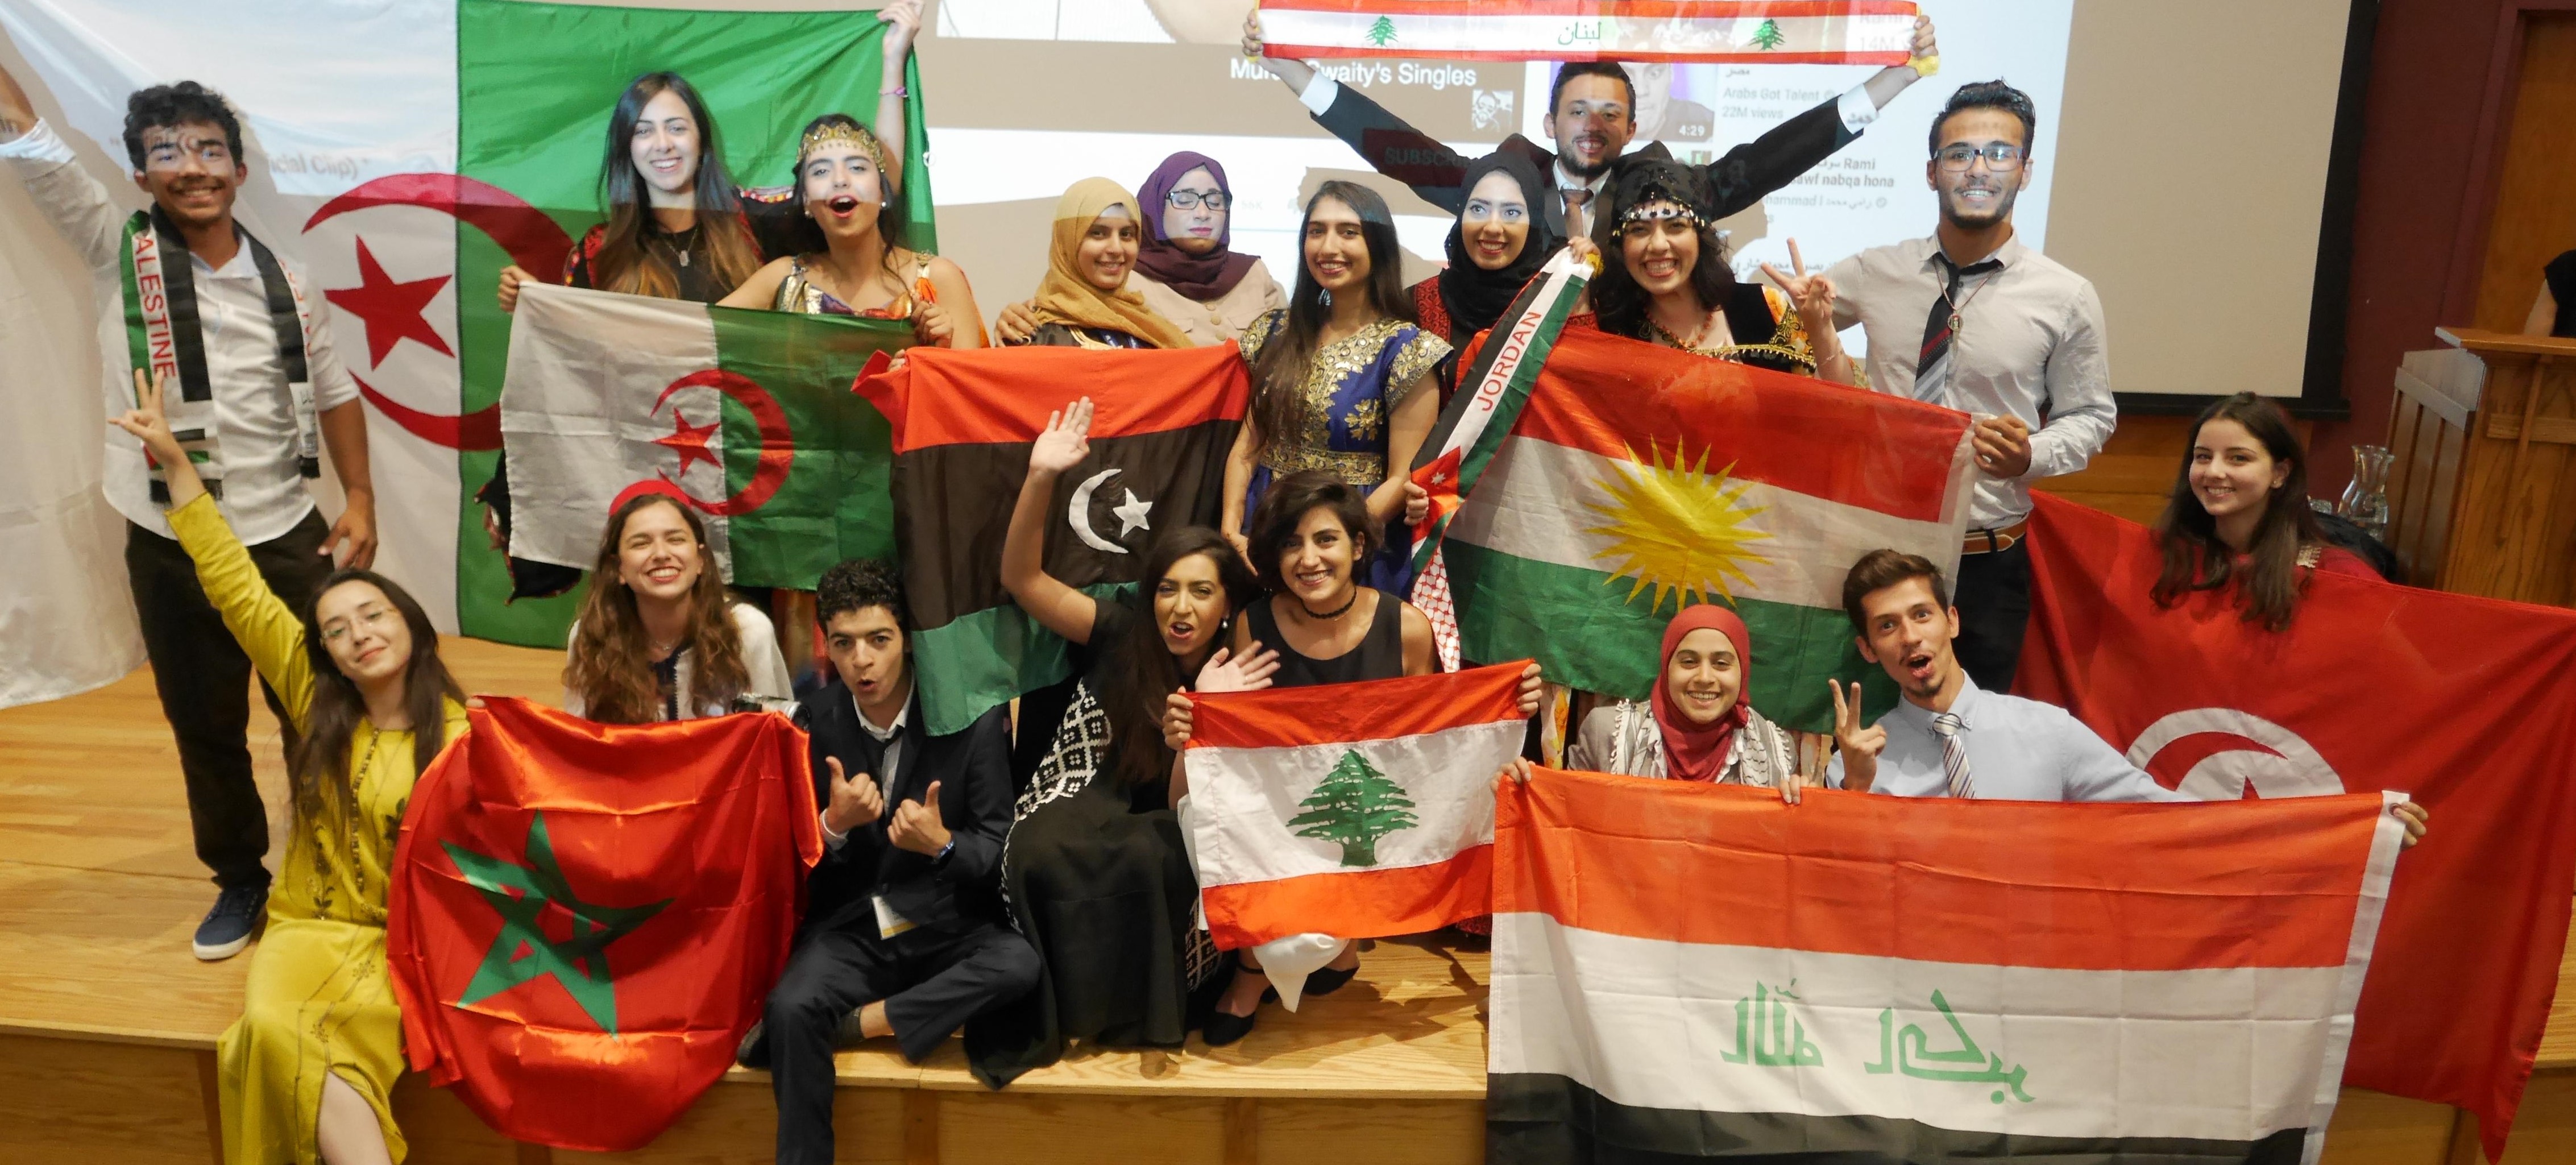 Young students stabd on a stage in traditional Middle Eastern and North African wear, looking psyched and holding flags.